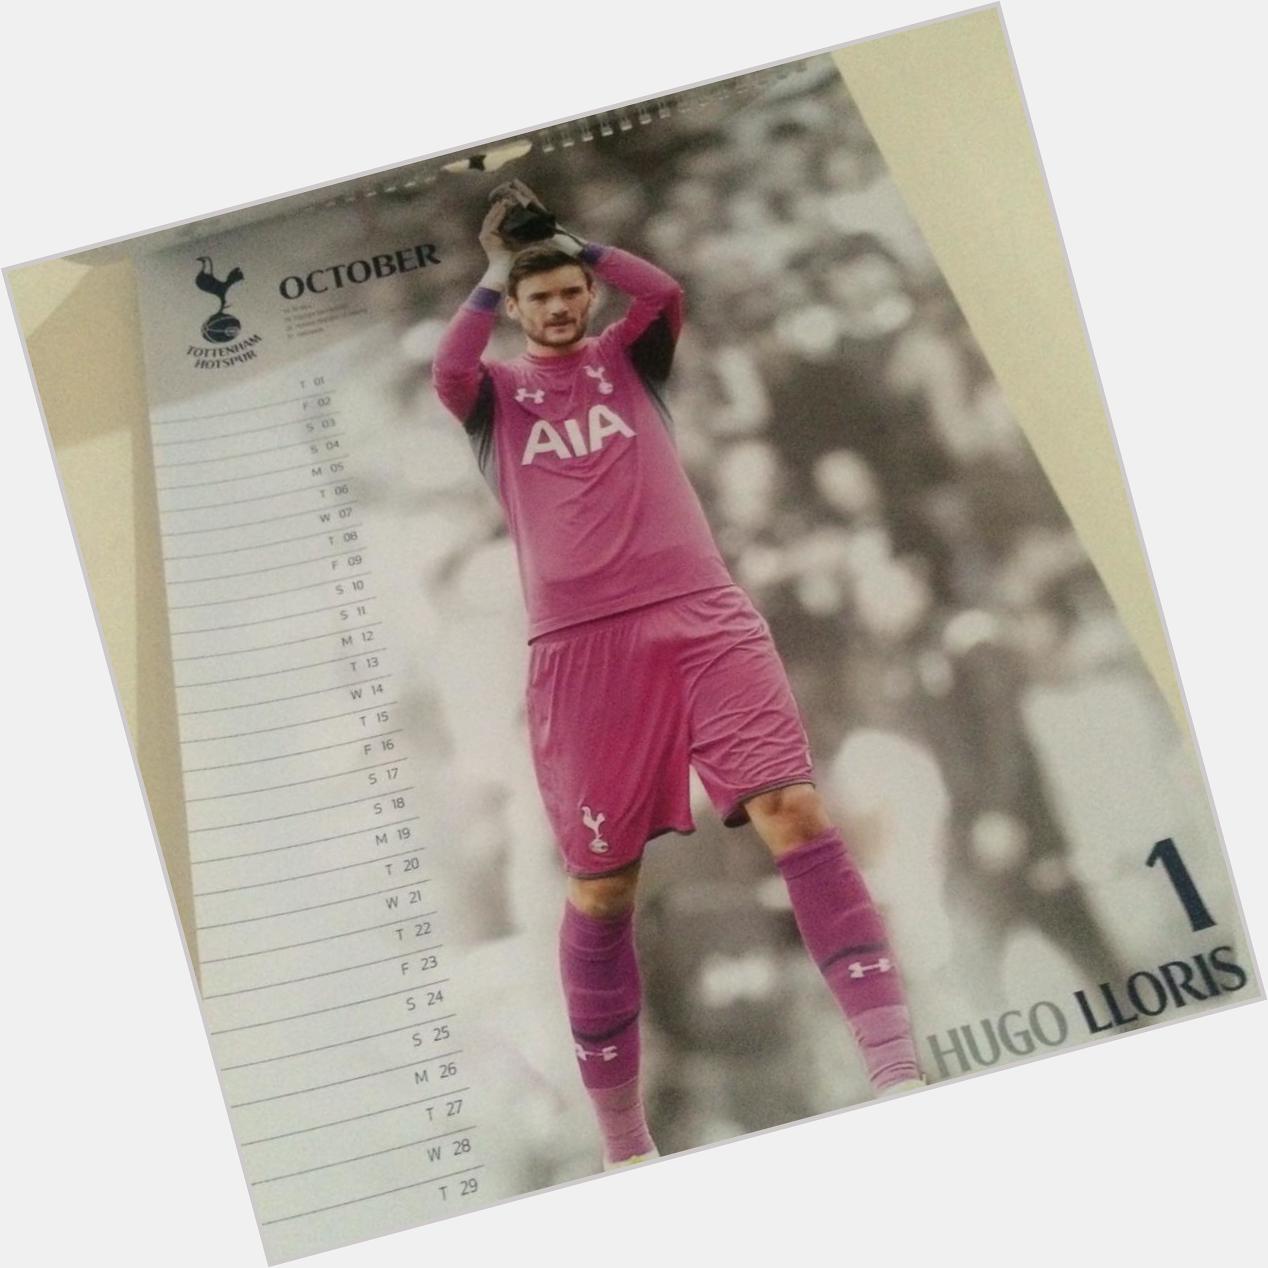  Happy Birthday to dearest Hugo Lloris.. World class player and a thorough professional .. 